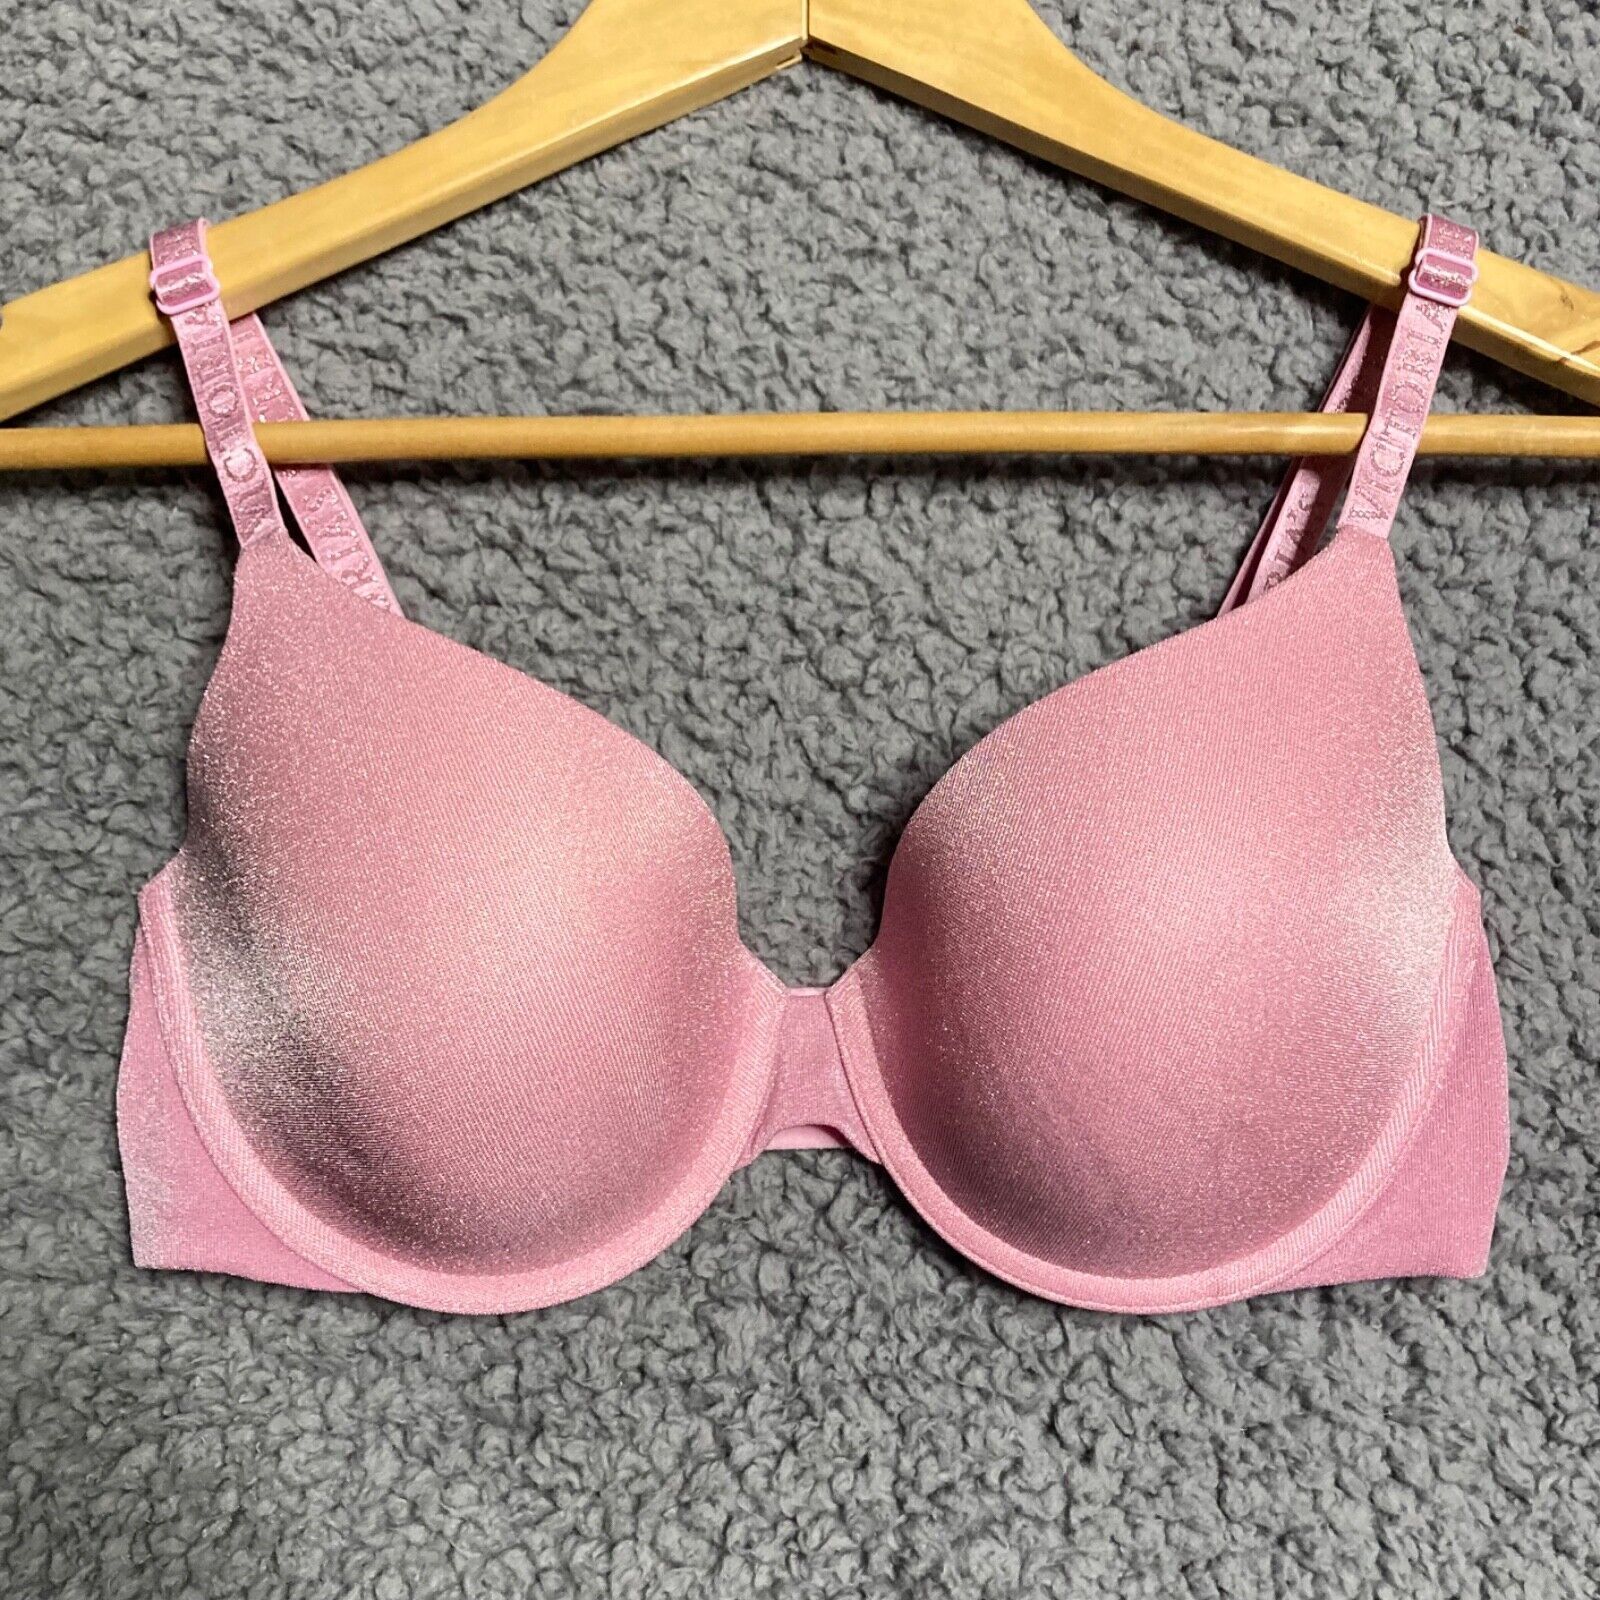 New Bra Victoria Secret Size 34d Lined Perfect Coverage firm Price